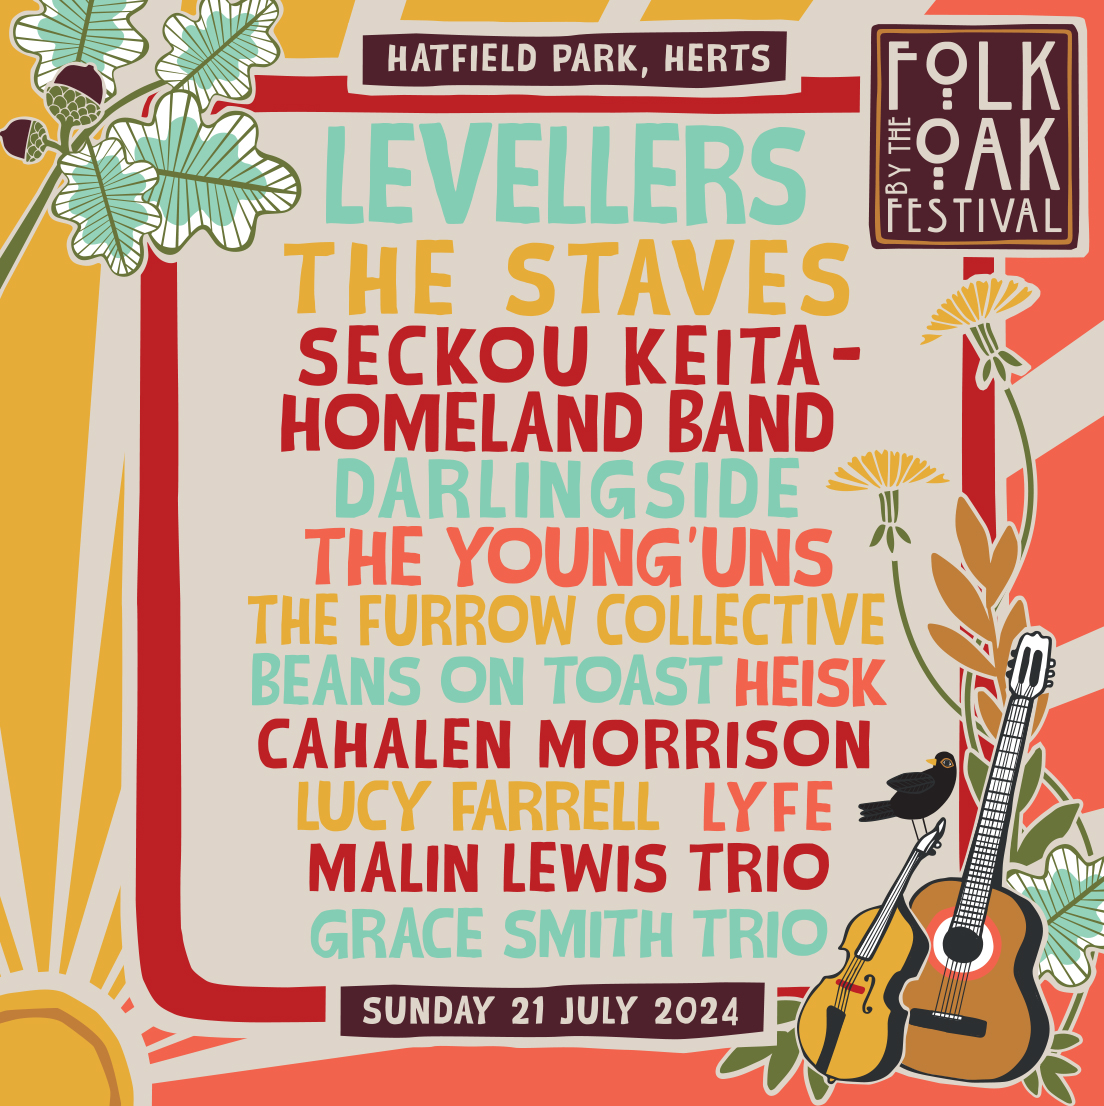 😃Wow! Our early bird tickets are flying out & there’s just 1 day left to get yours!🎟️ ⏳ Book TODAY at folkbytheoak.com for great savings on Adult & Family tickets, & join us for back-to-back exceptional music & festival fun in our beautiful arena at @_HatfieldPark_ 🌳🌞